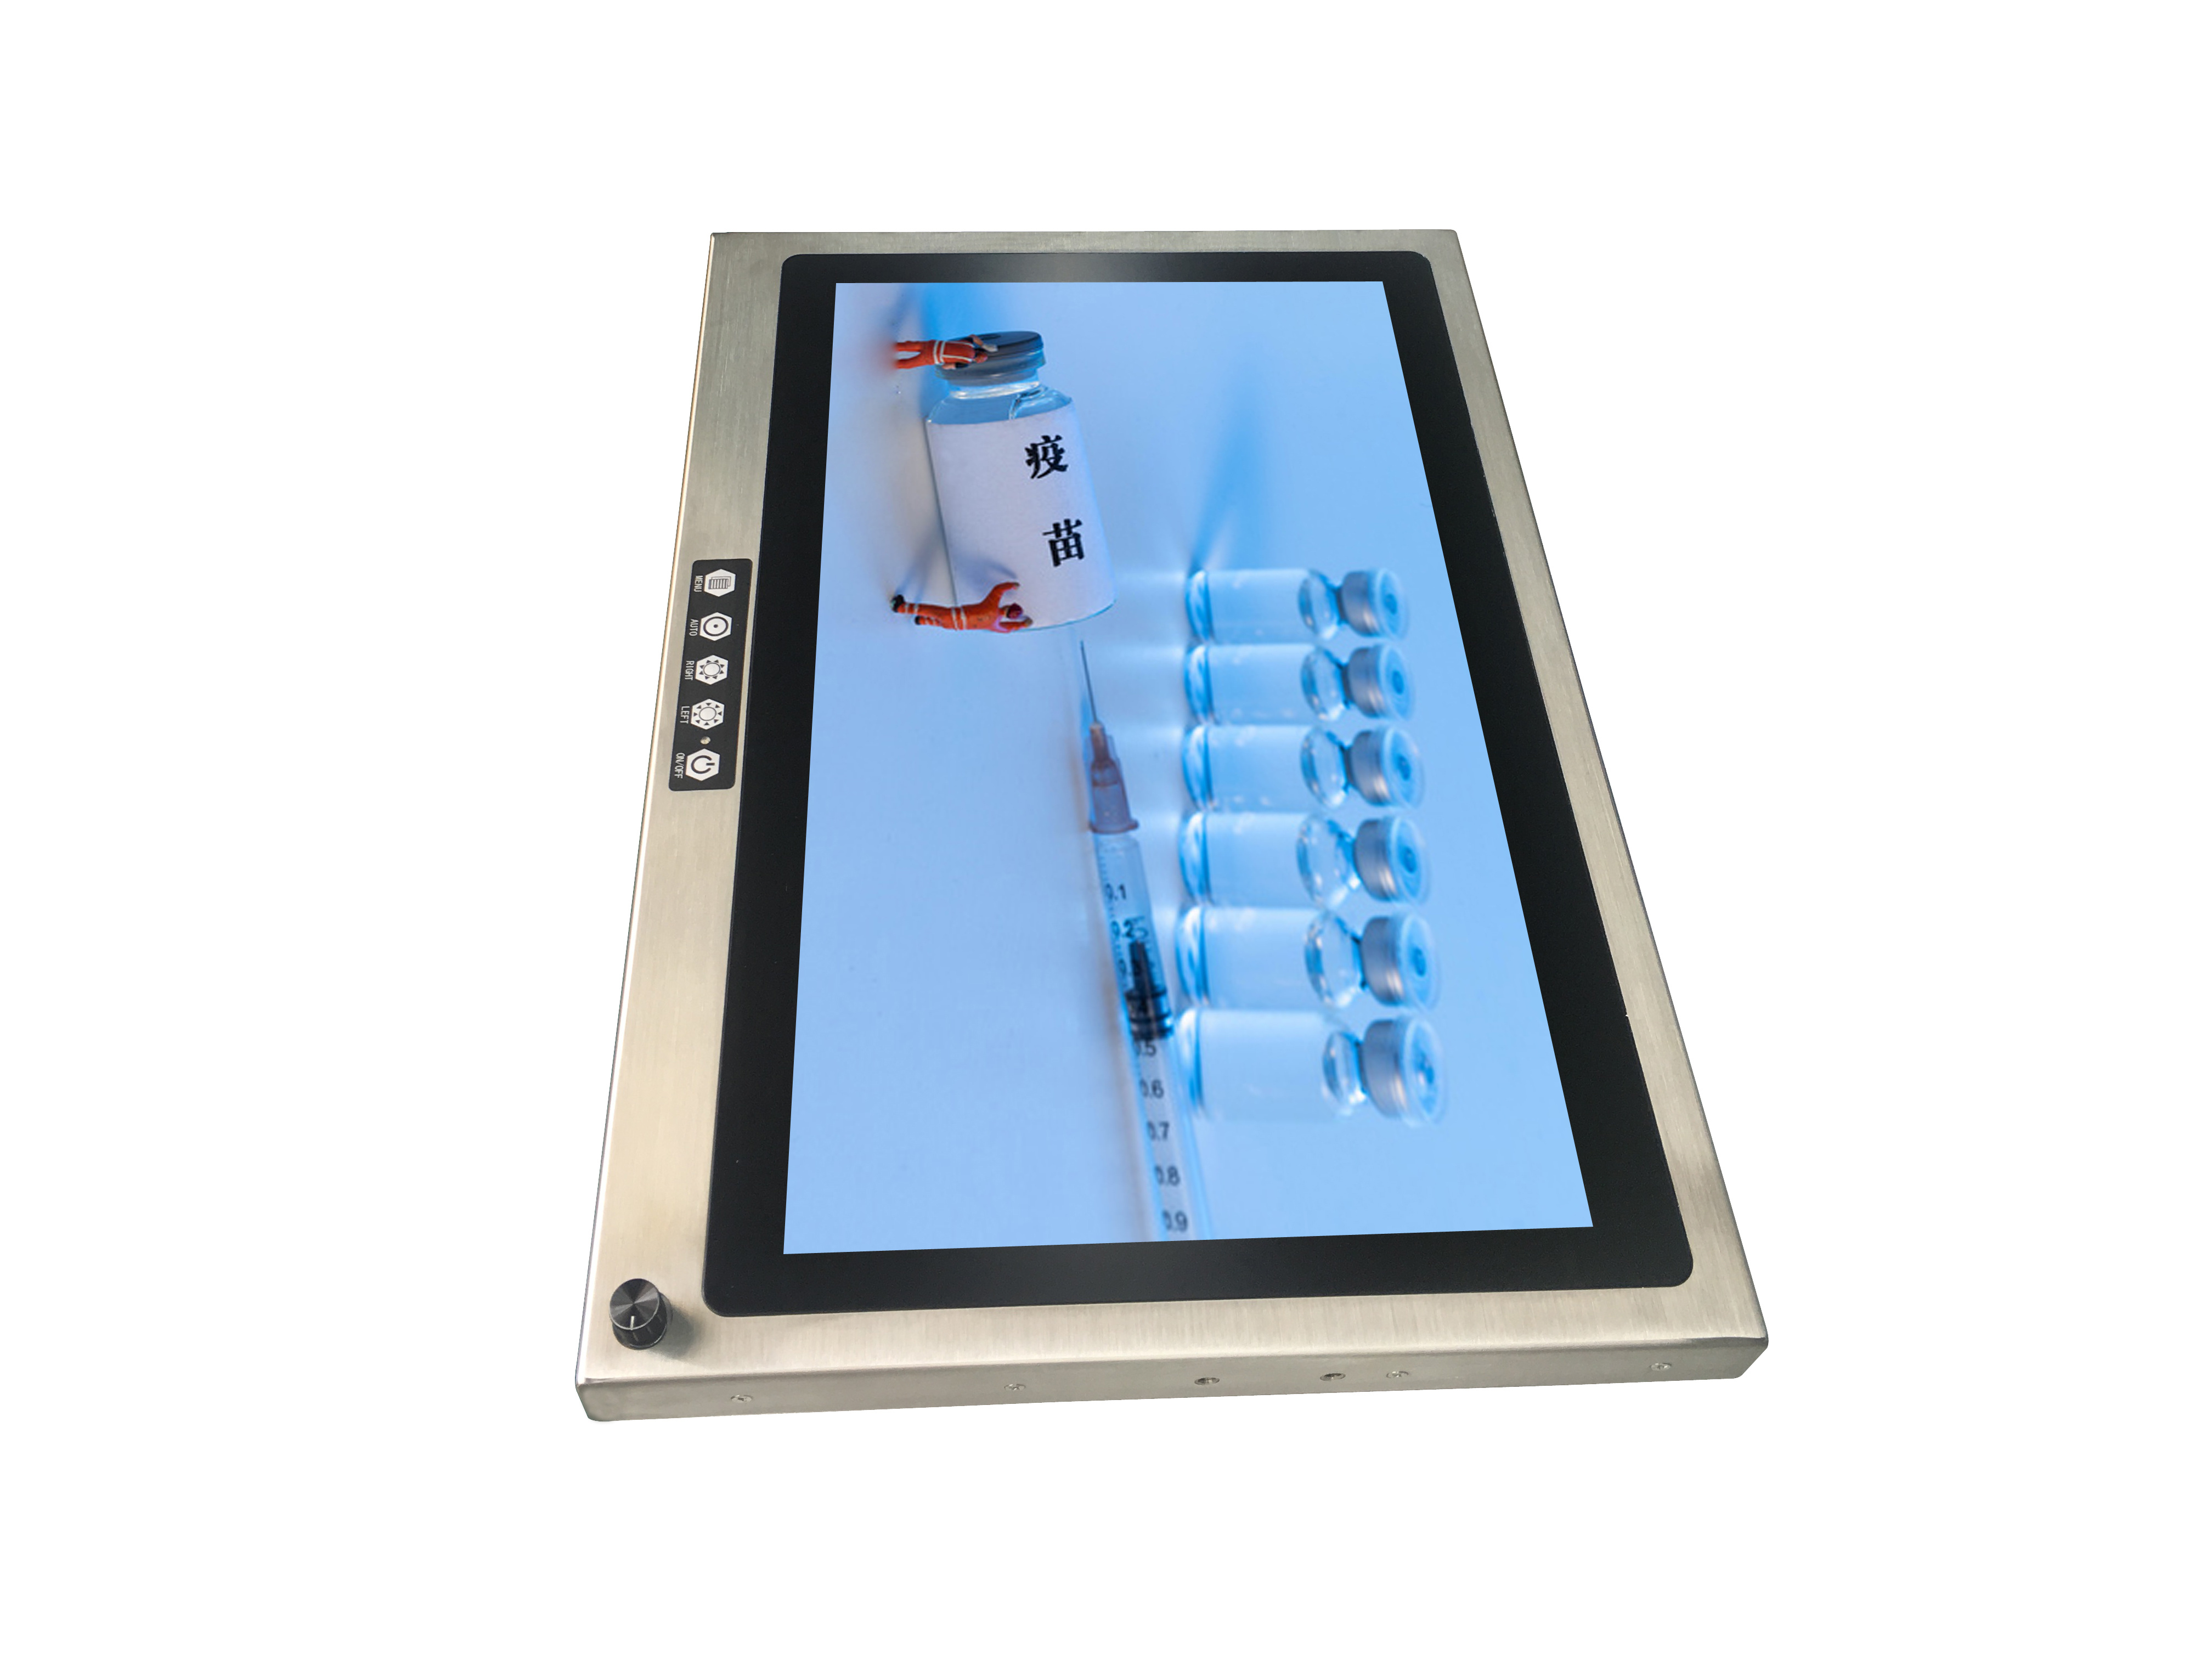 17.3 Inch Stainless Steel Full Ip67 Waterproof Industrial Touch Screen Monitor